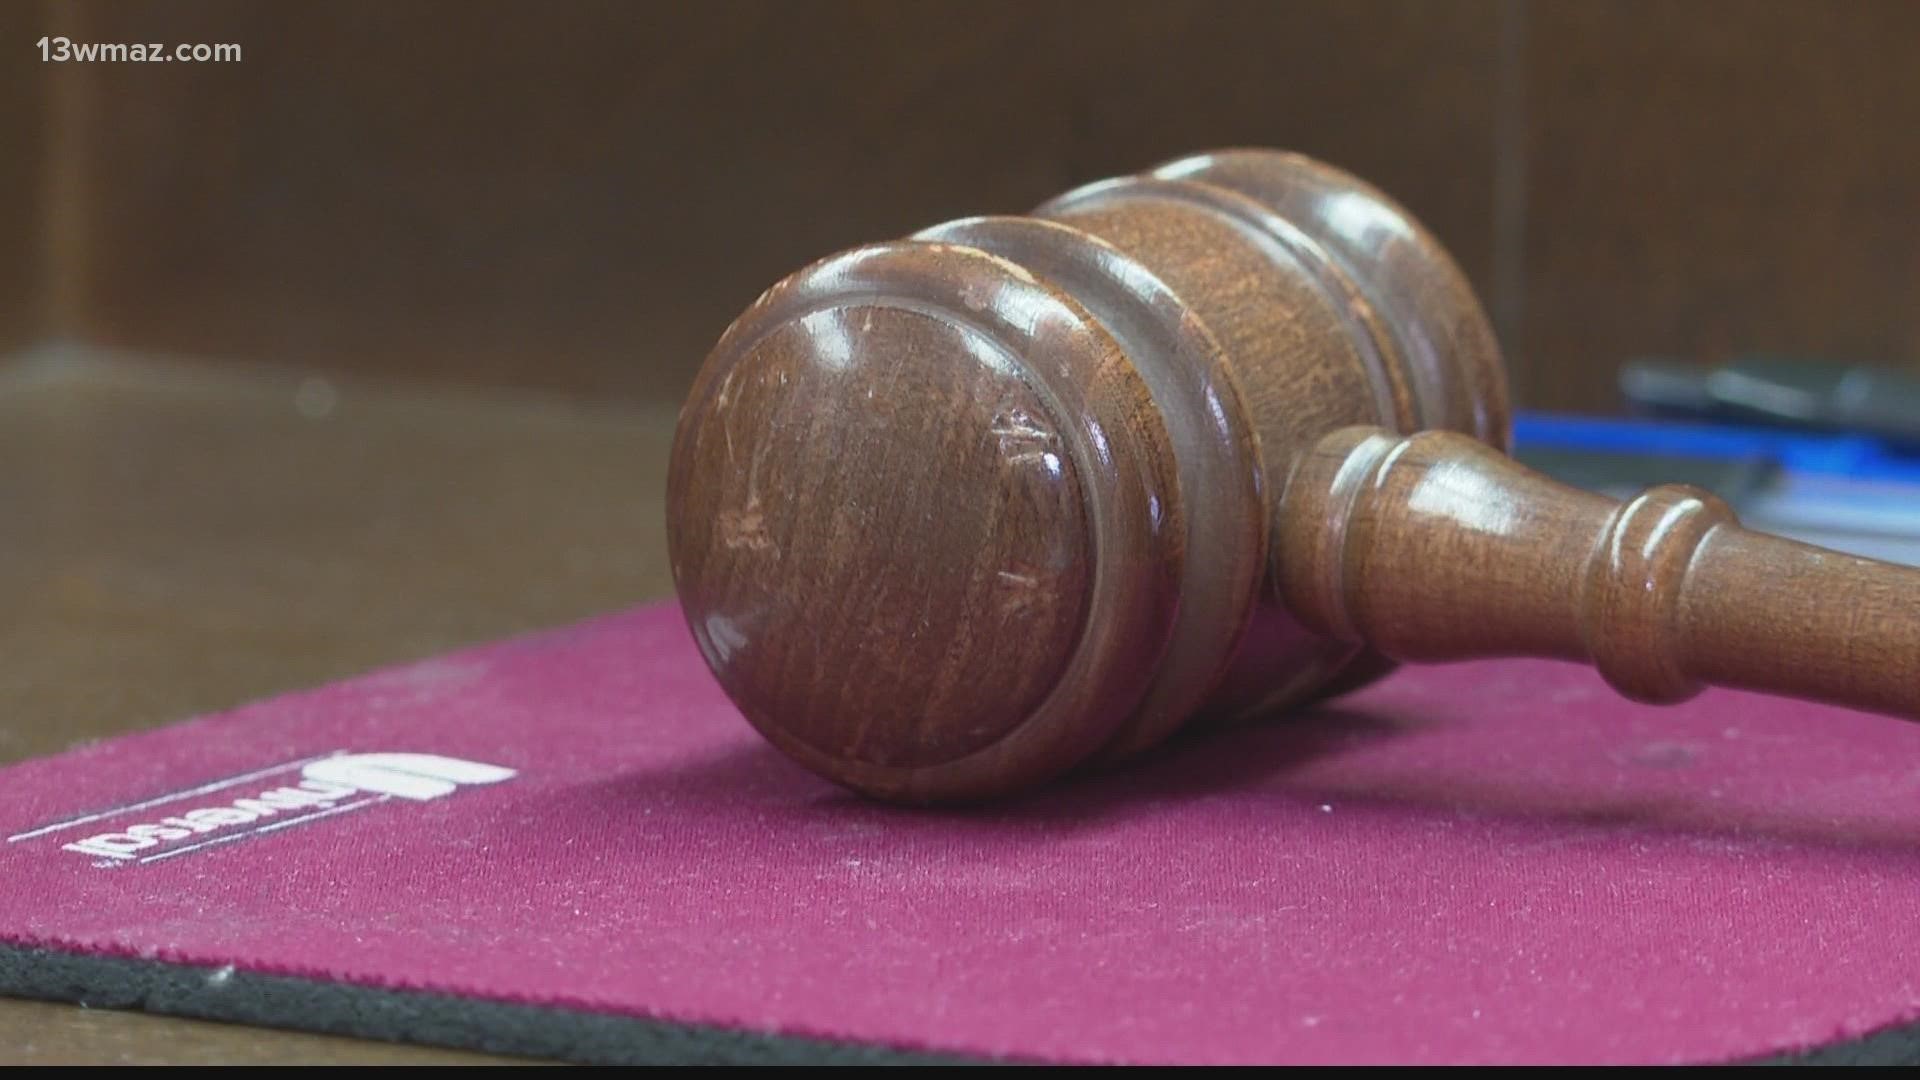 The City of Dublin started the first teen court in Georgia 25 years ago, and since then, they've helped more than 700 teens get back on the right track